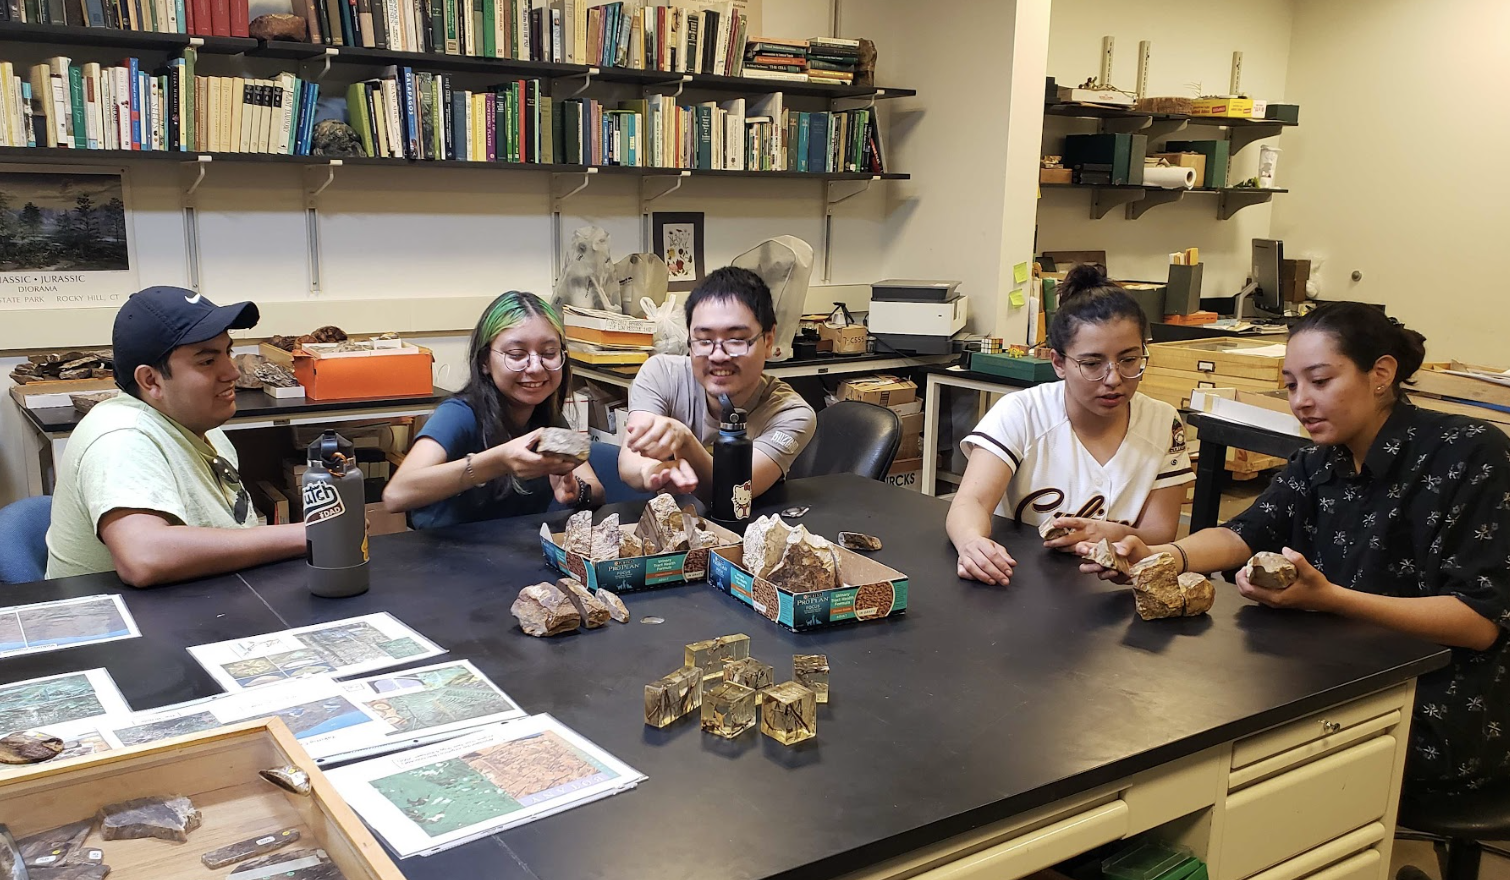 The scholars learn about paleobotany